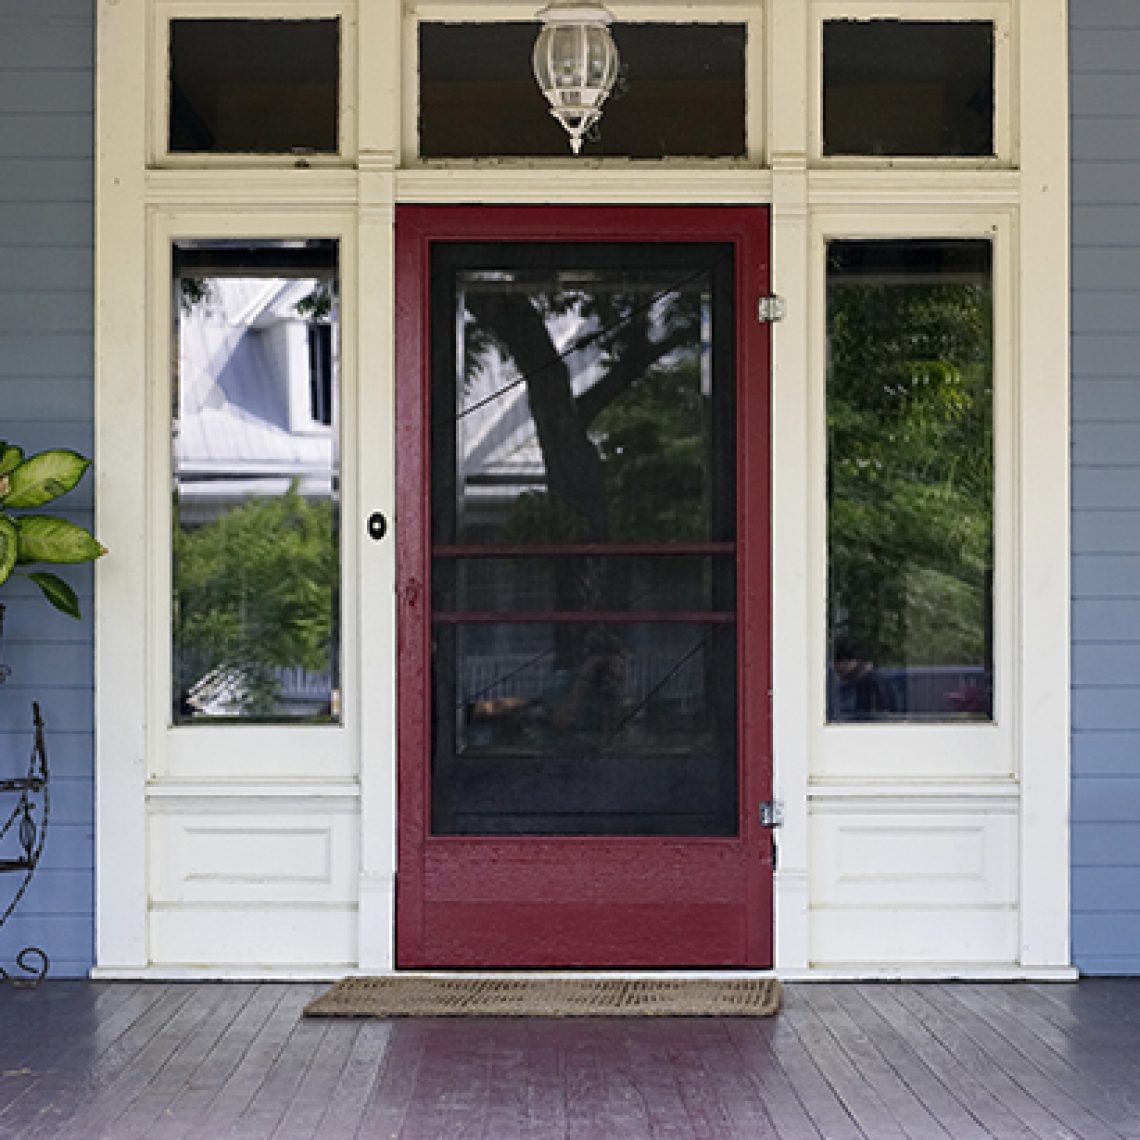 Front porch and front door of house